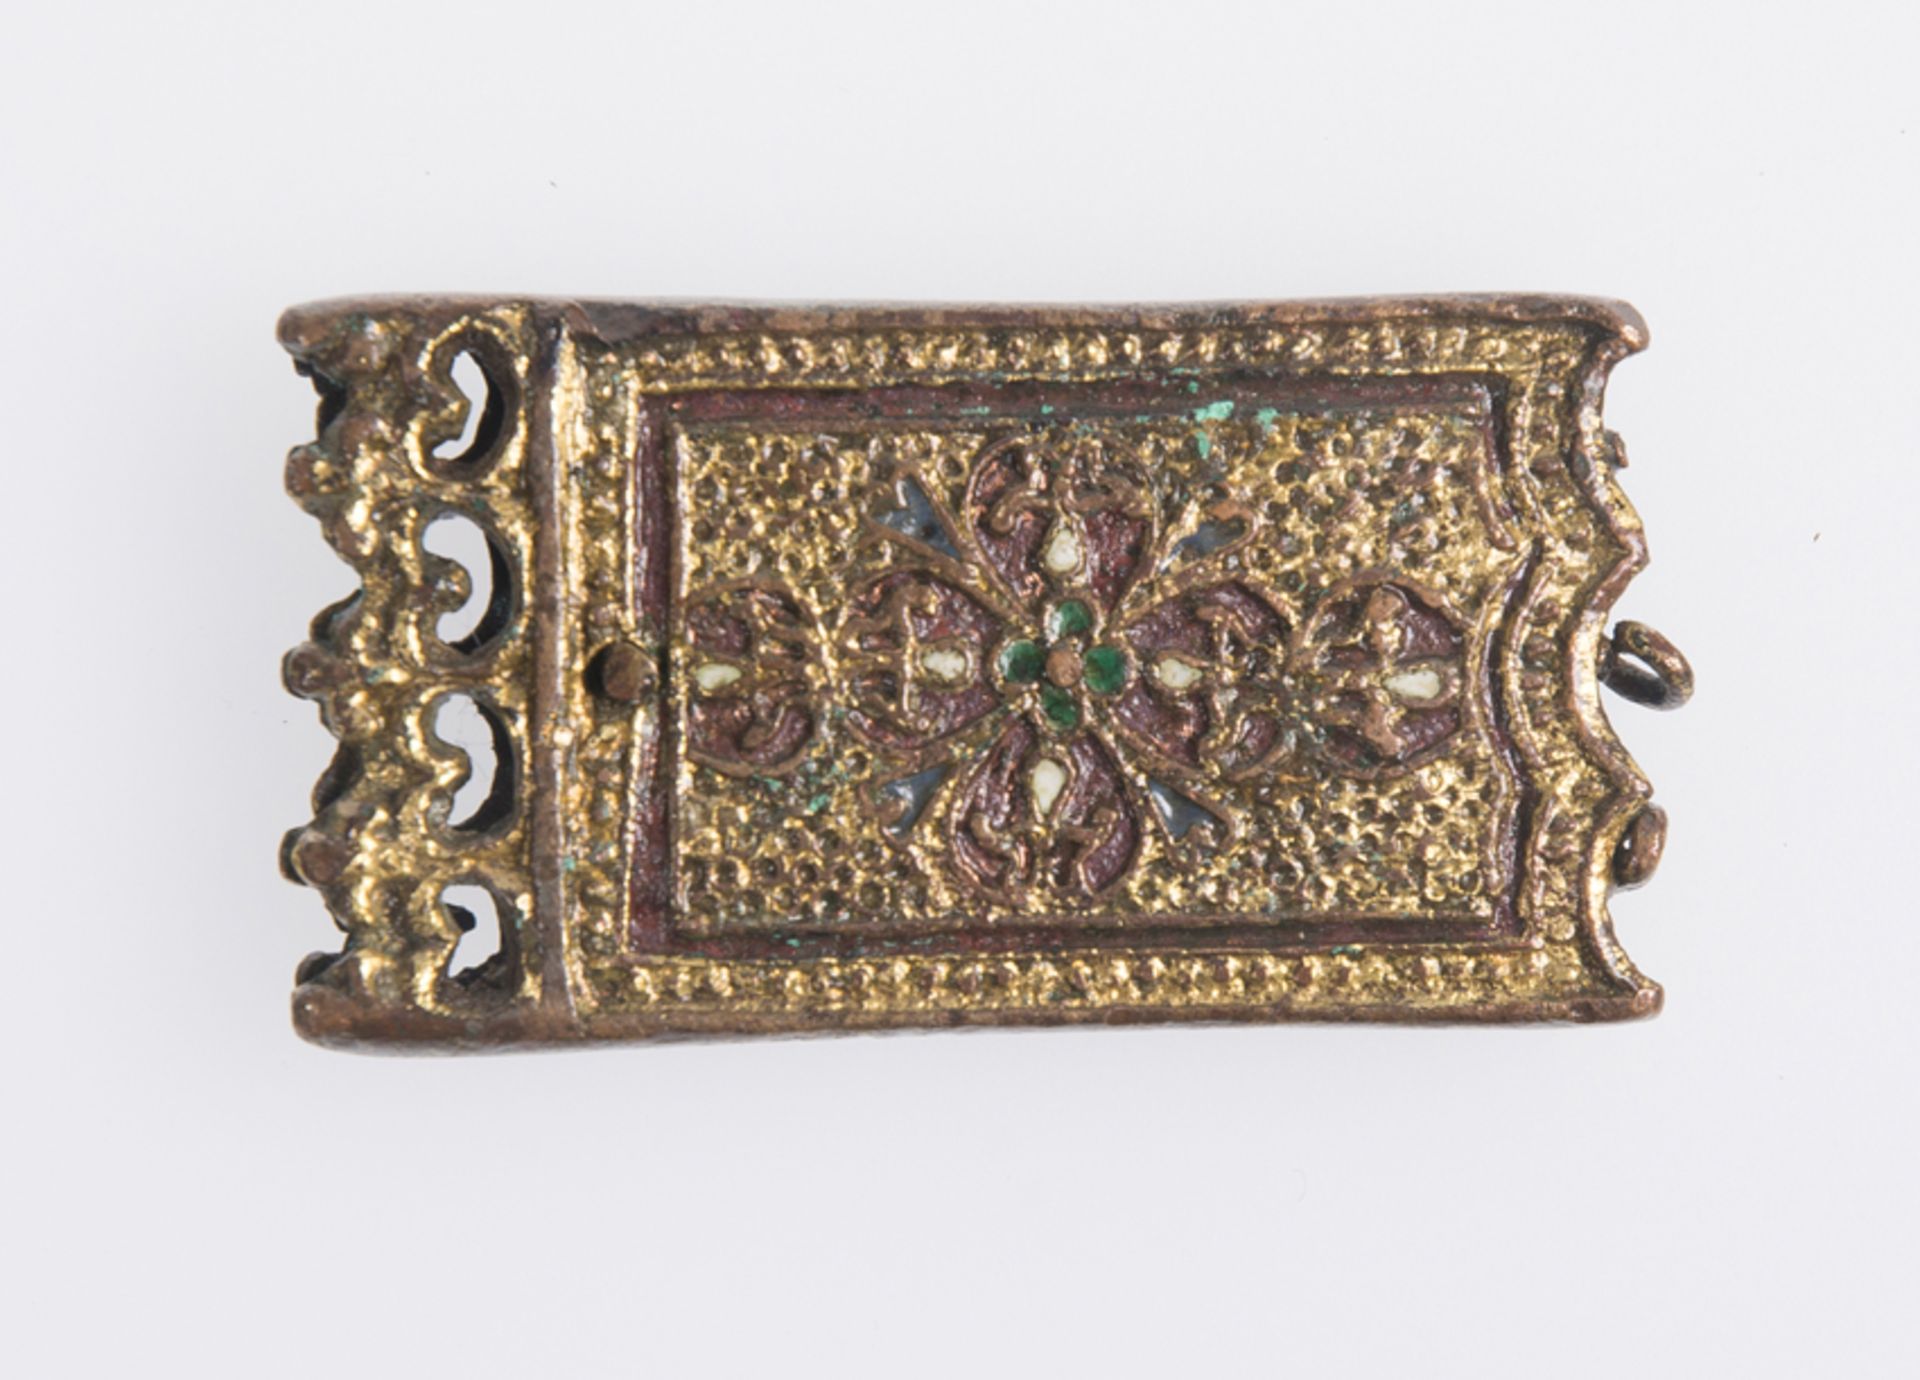 Chased, gilded and enamelled bronze buckle or ornament. Possibly Nasrid. 14th - 15th century.